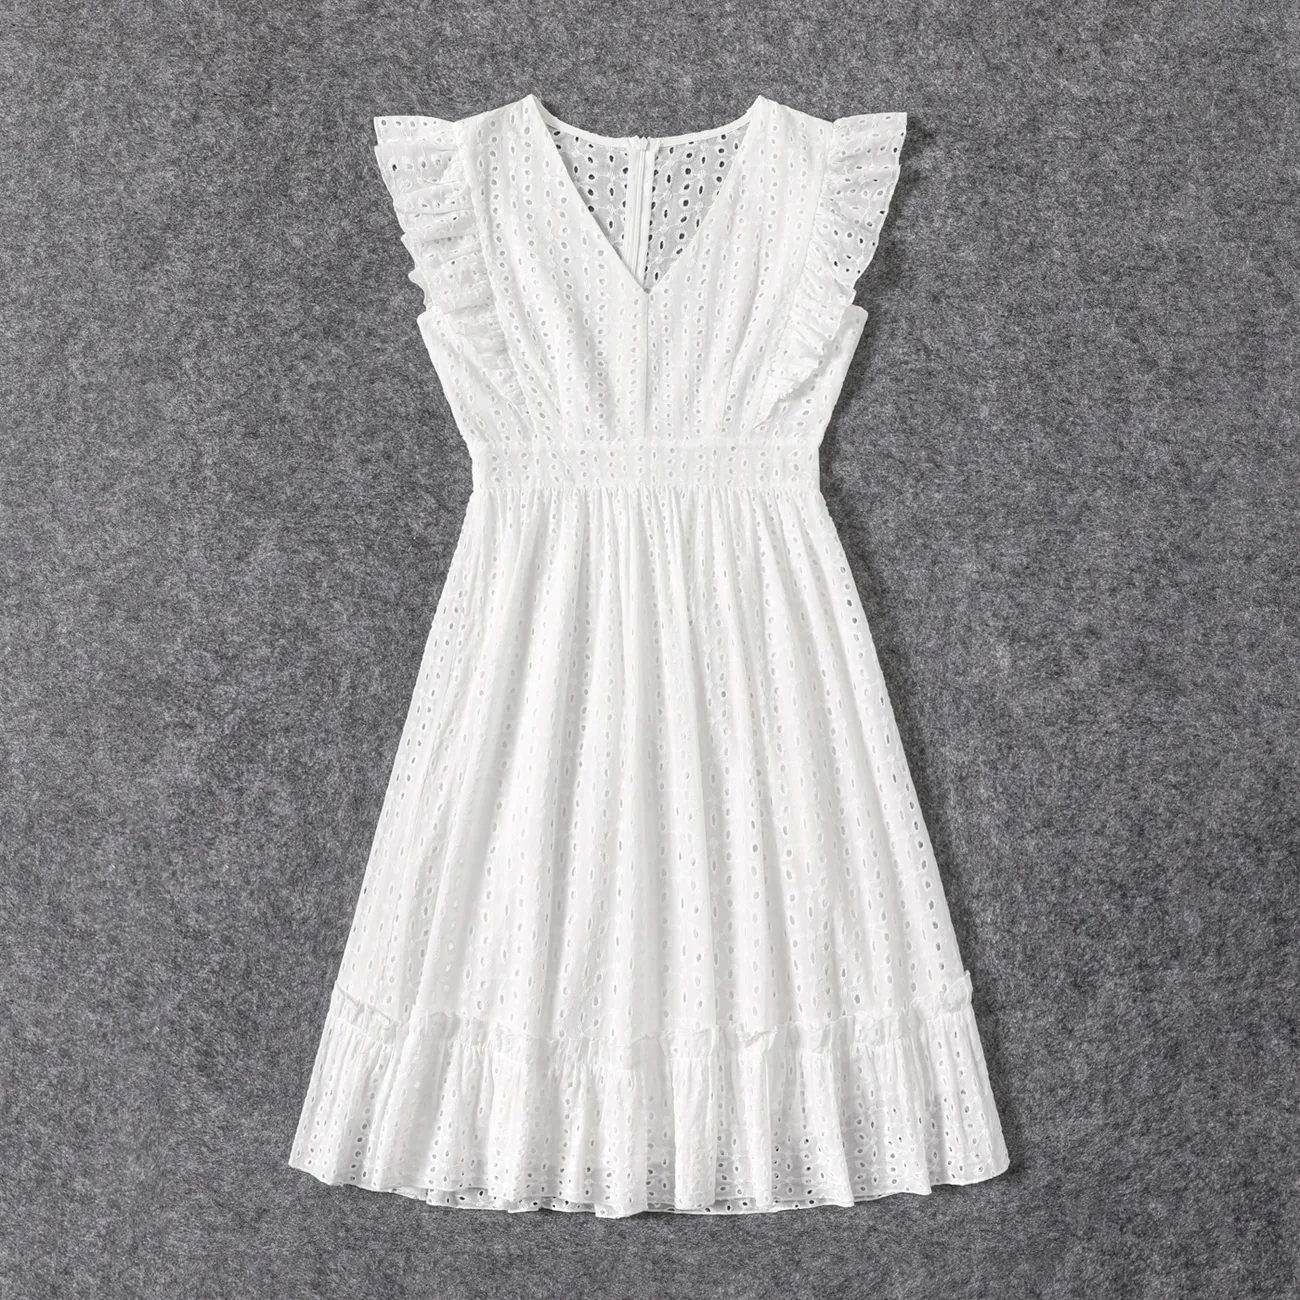 100% Cotton White Hollow-Out Floral Embroidered Ruffle Sleeveless Dress for Mom and Me White big image 1